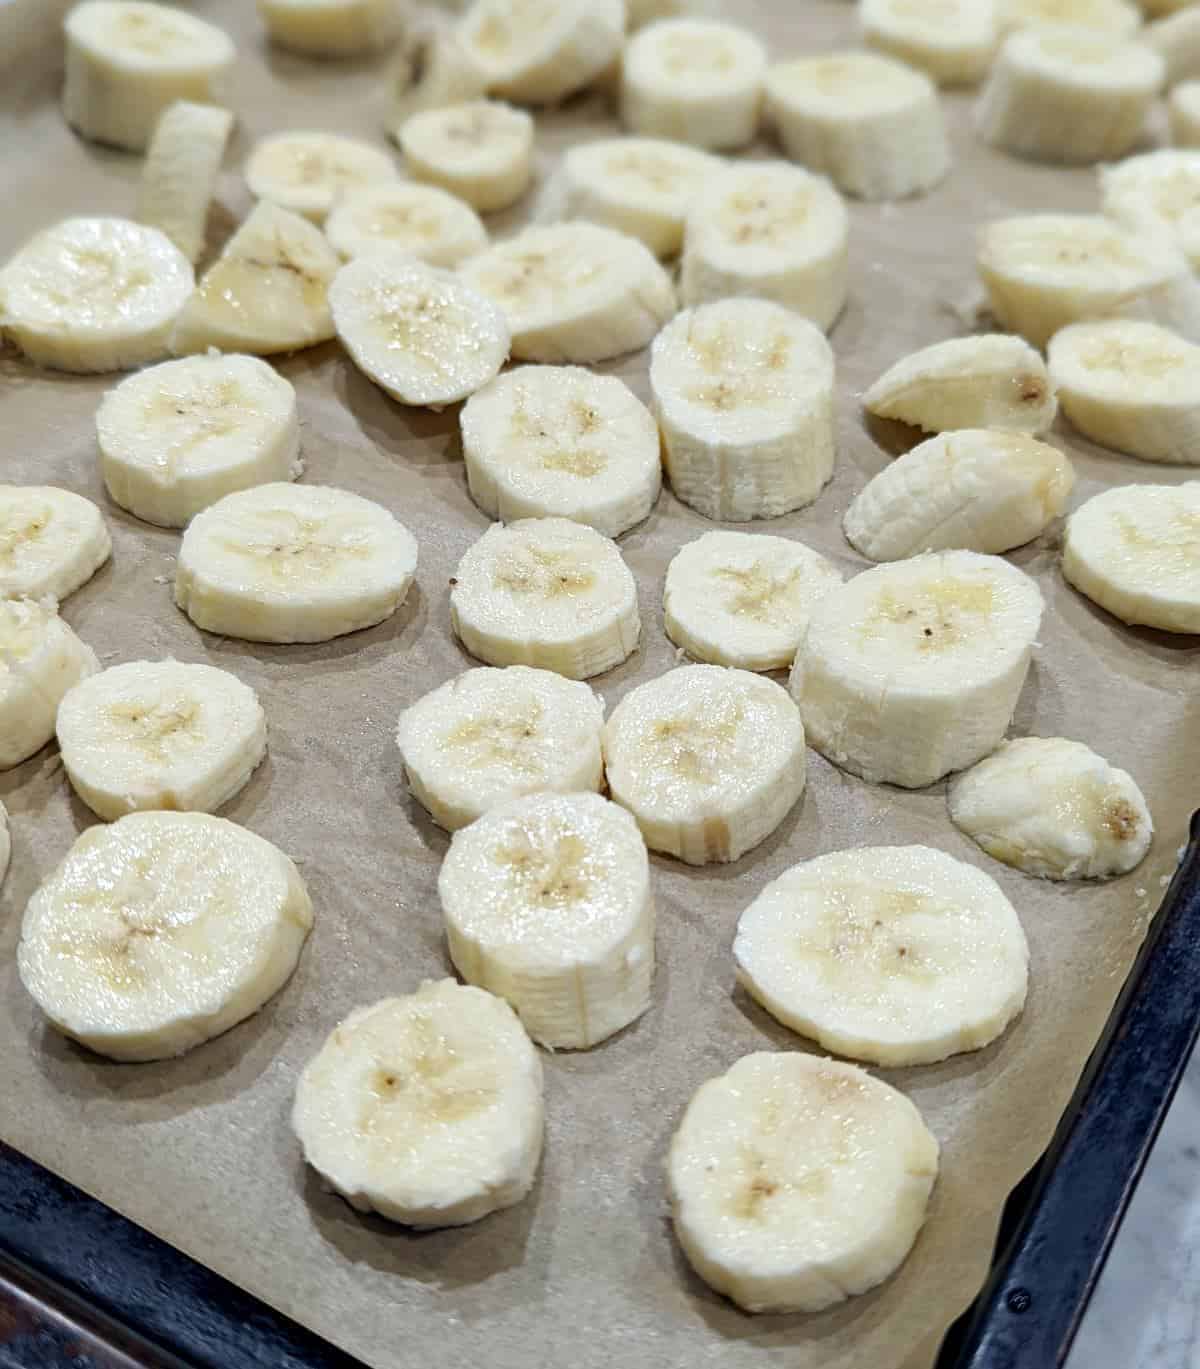 Sliced bananas on a parchment paper-lined baking sheet.